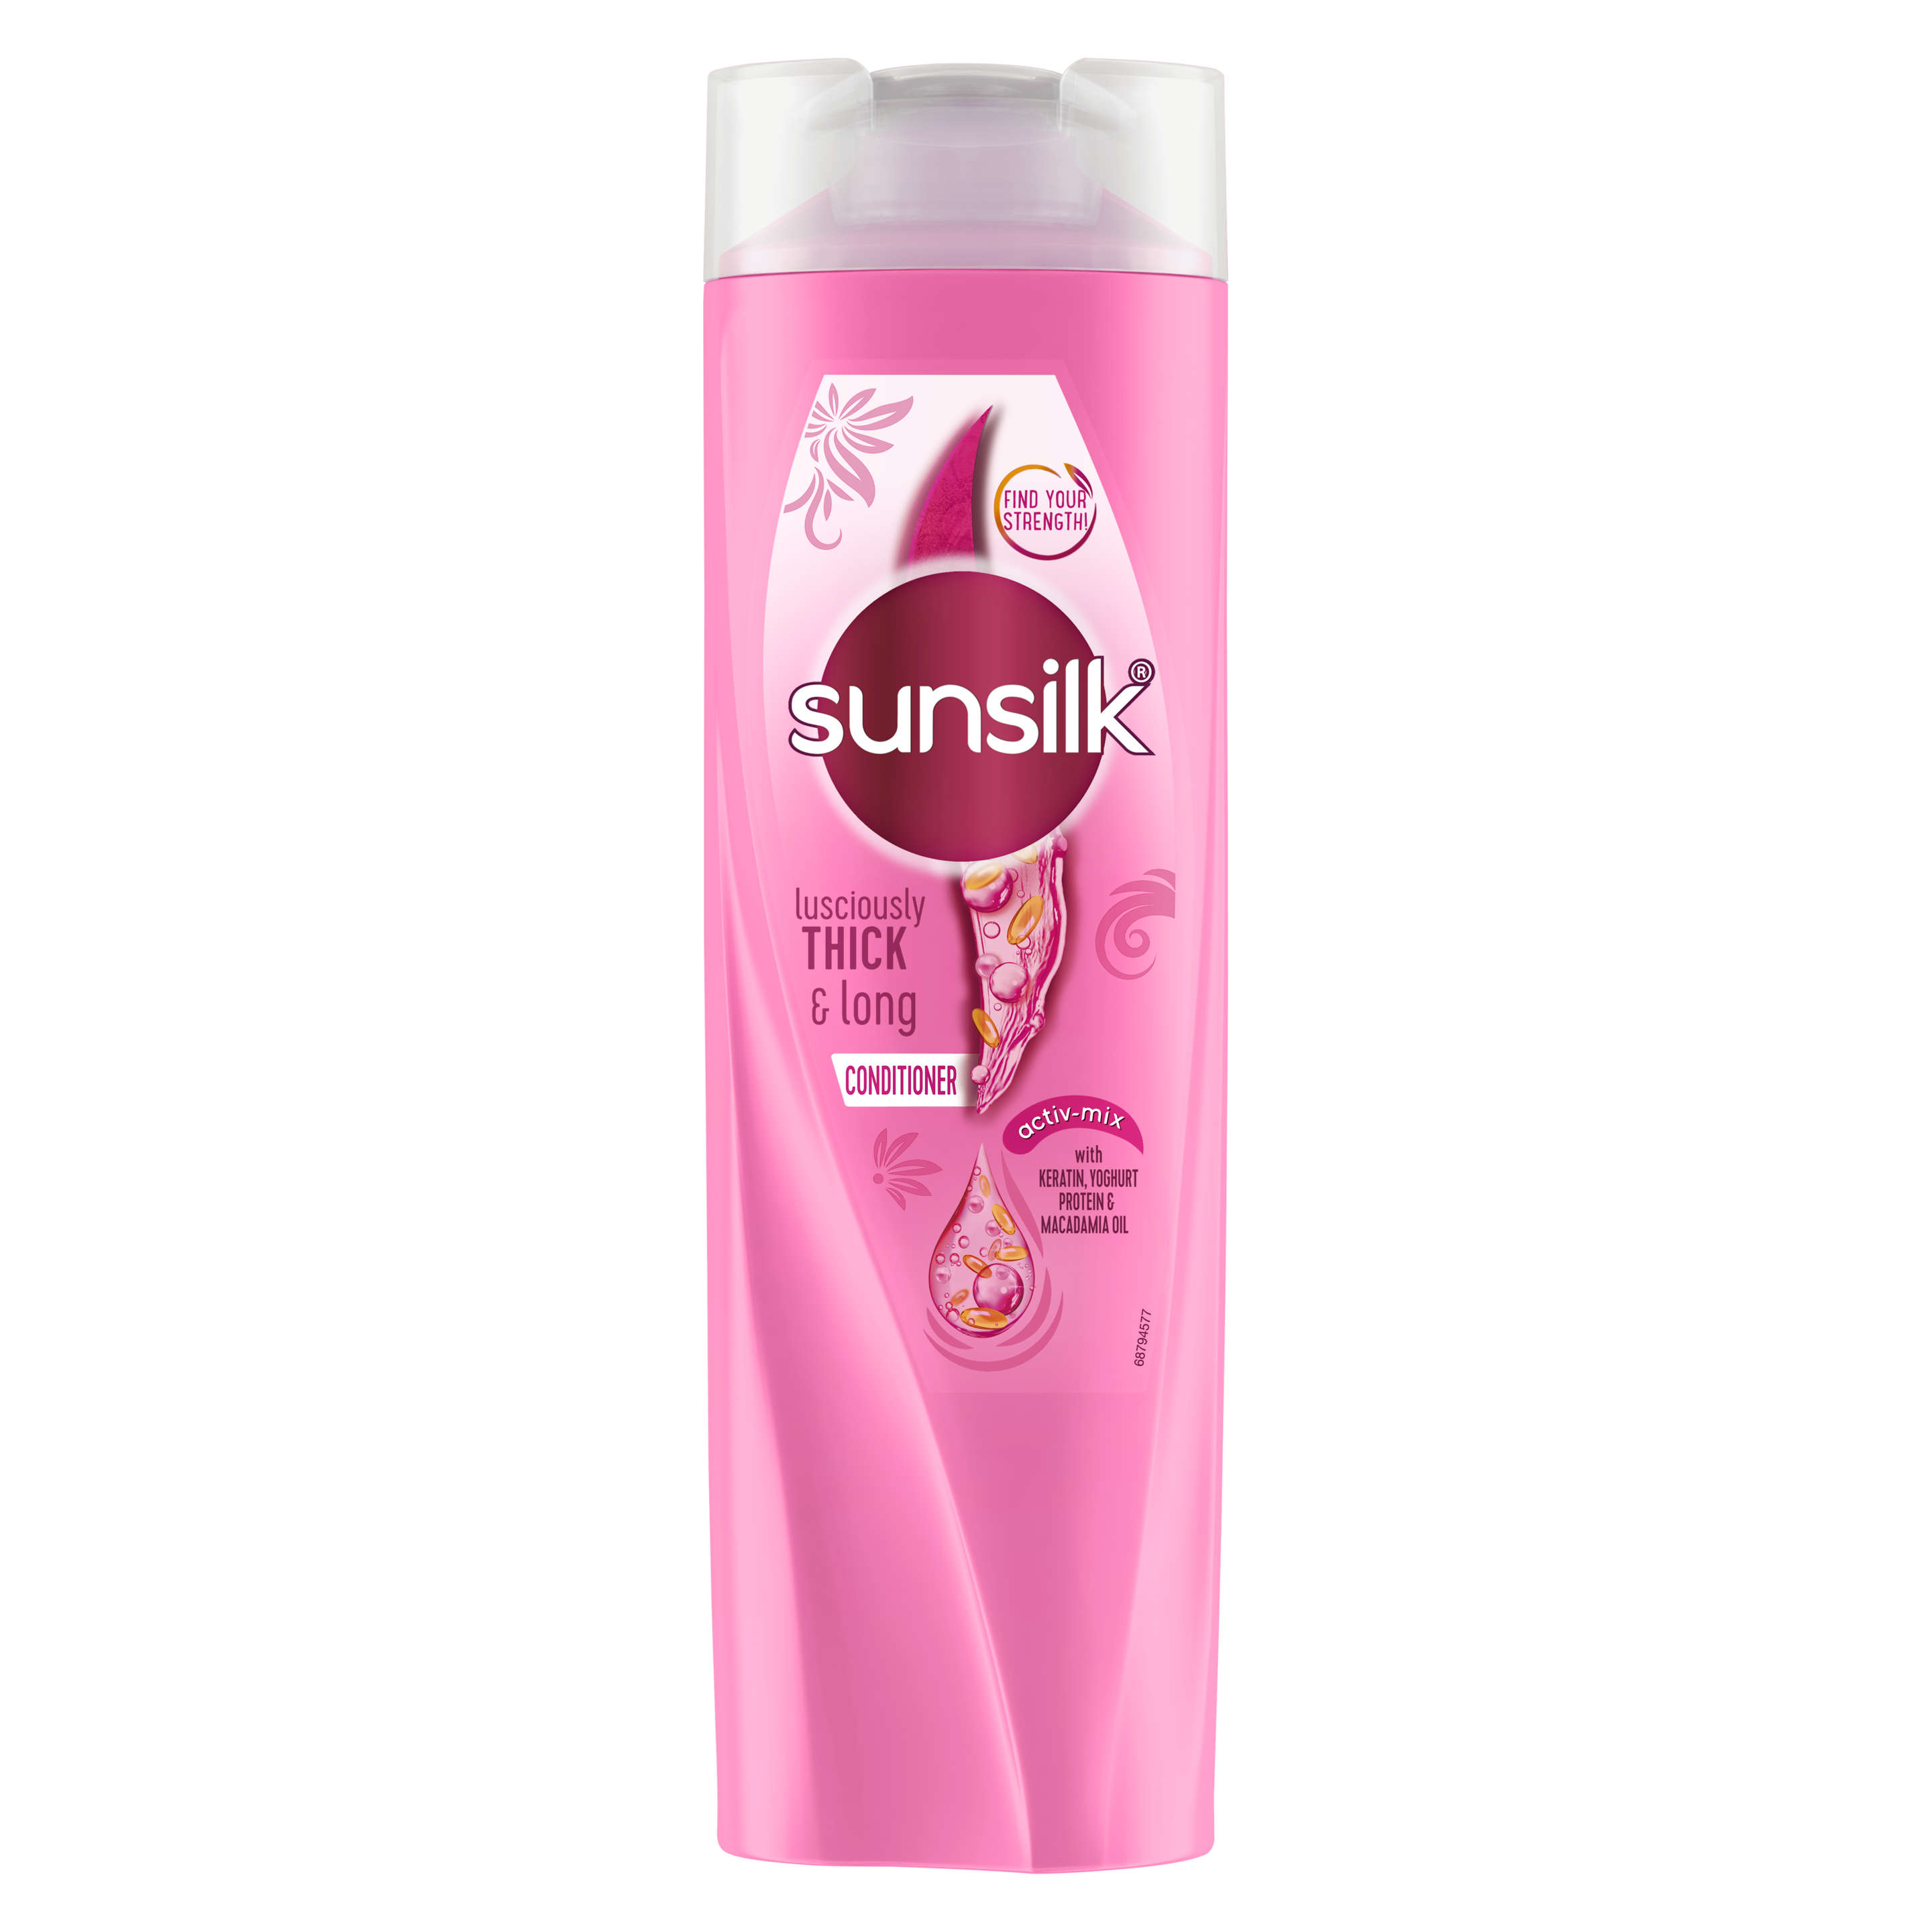 Sunsilk Lusciously Thick & Long Conditioner